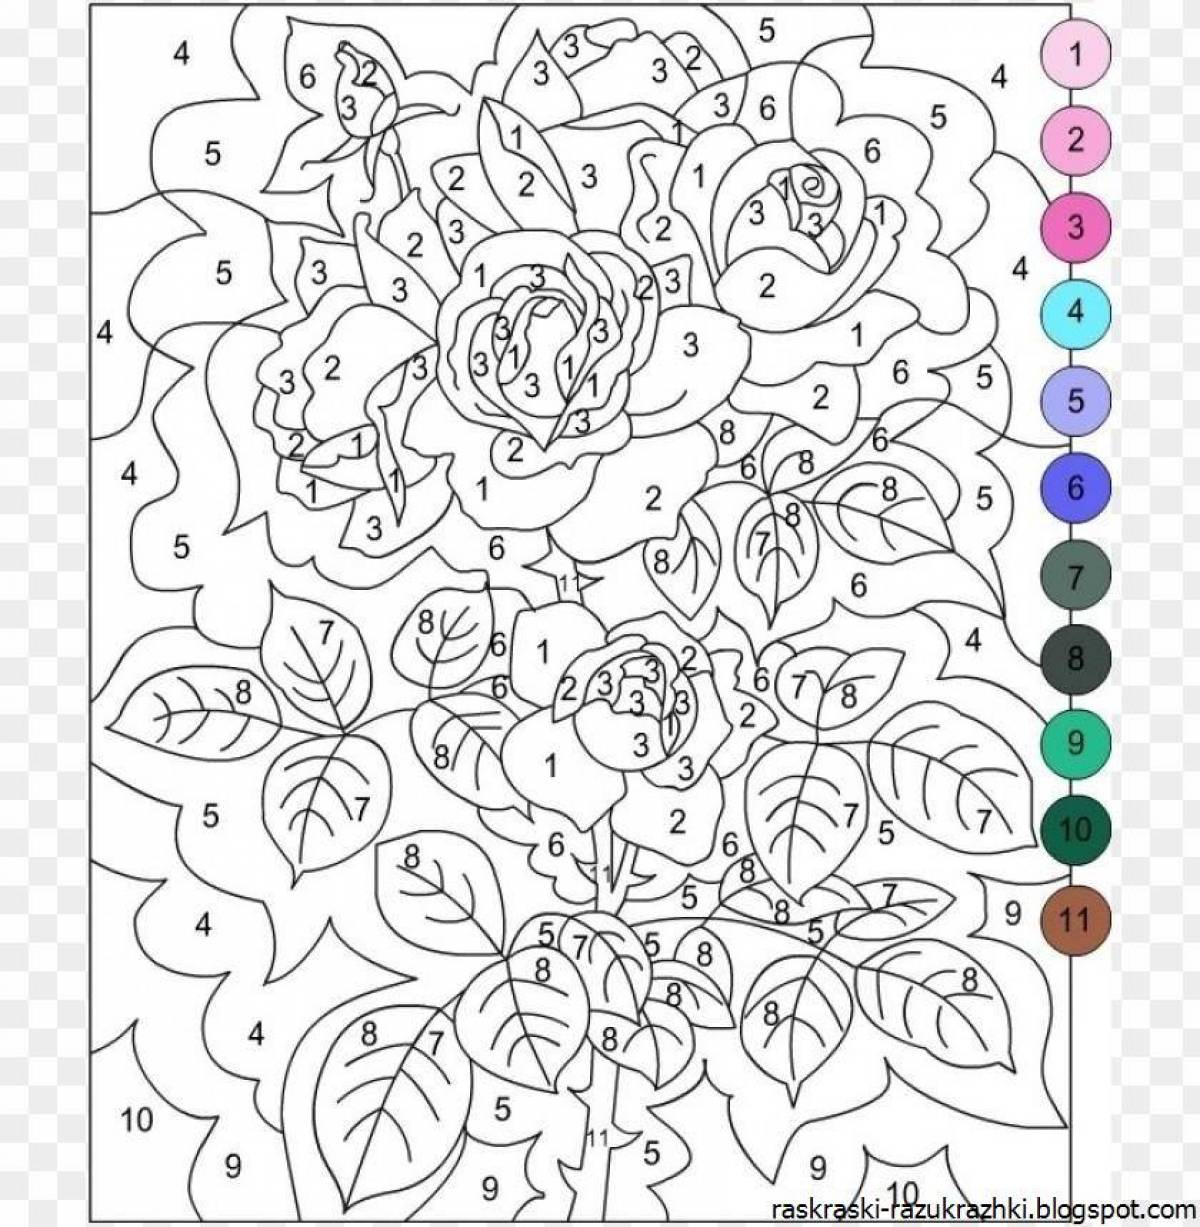 Adorable adult coloring by numbers offline